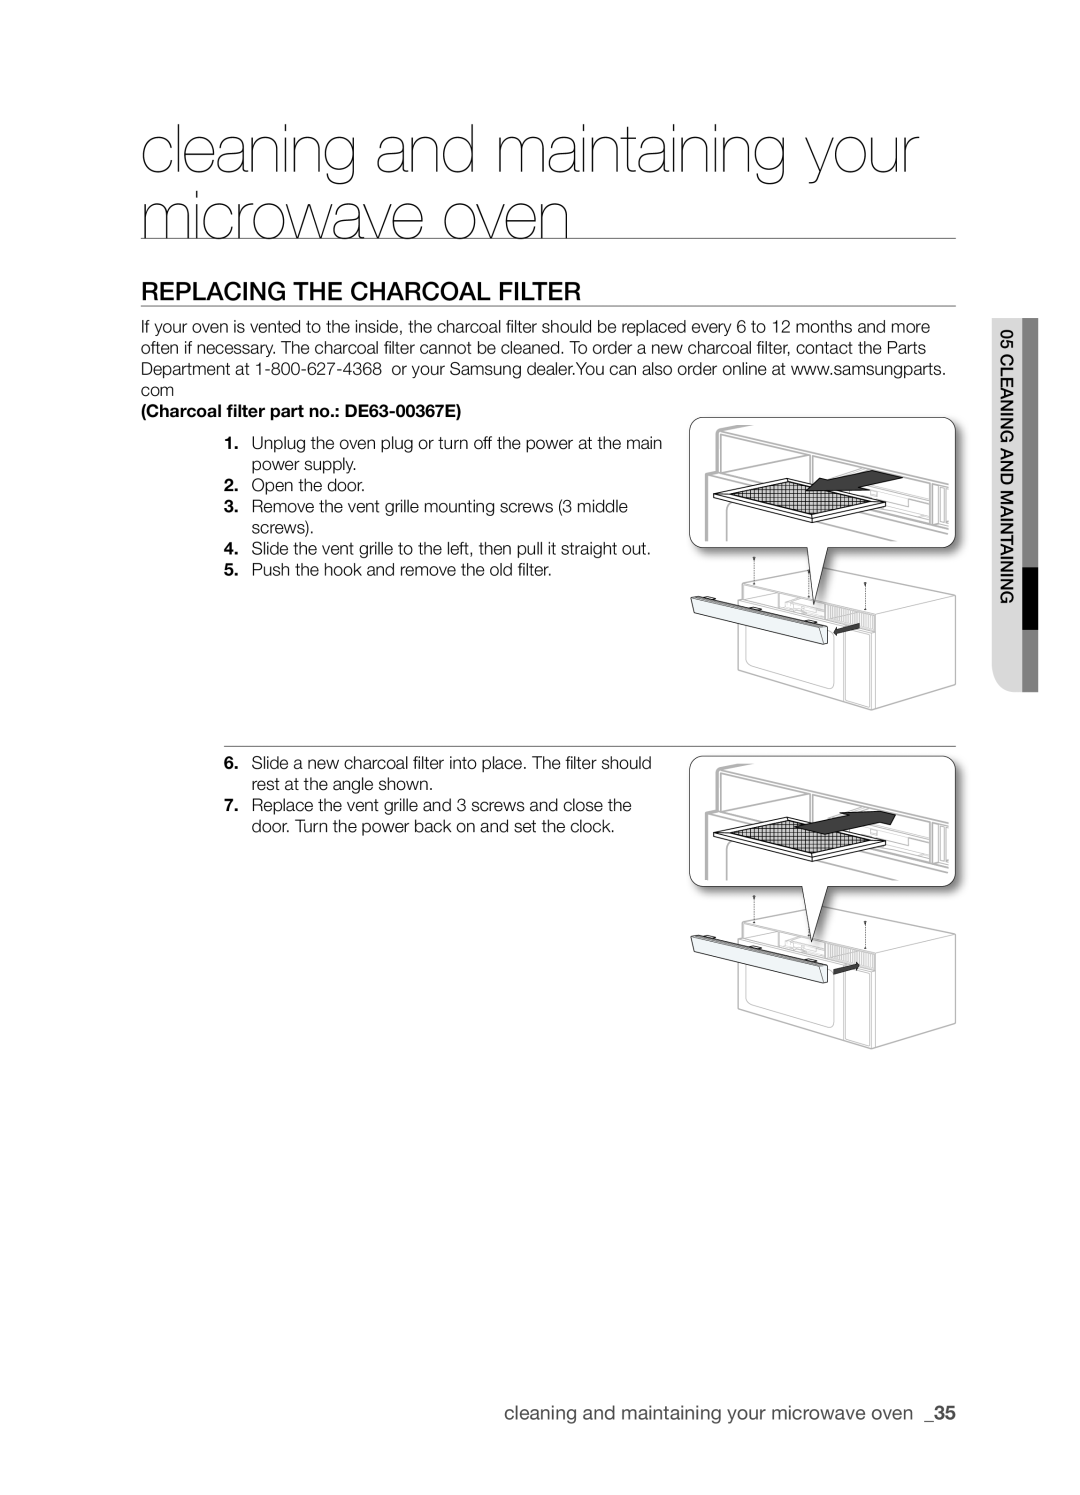 Samsung SMH9151 user manual Replacing the charcoal filter, cleaning and maintaining your microwave oven 